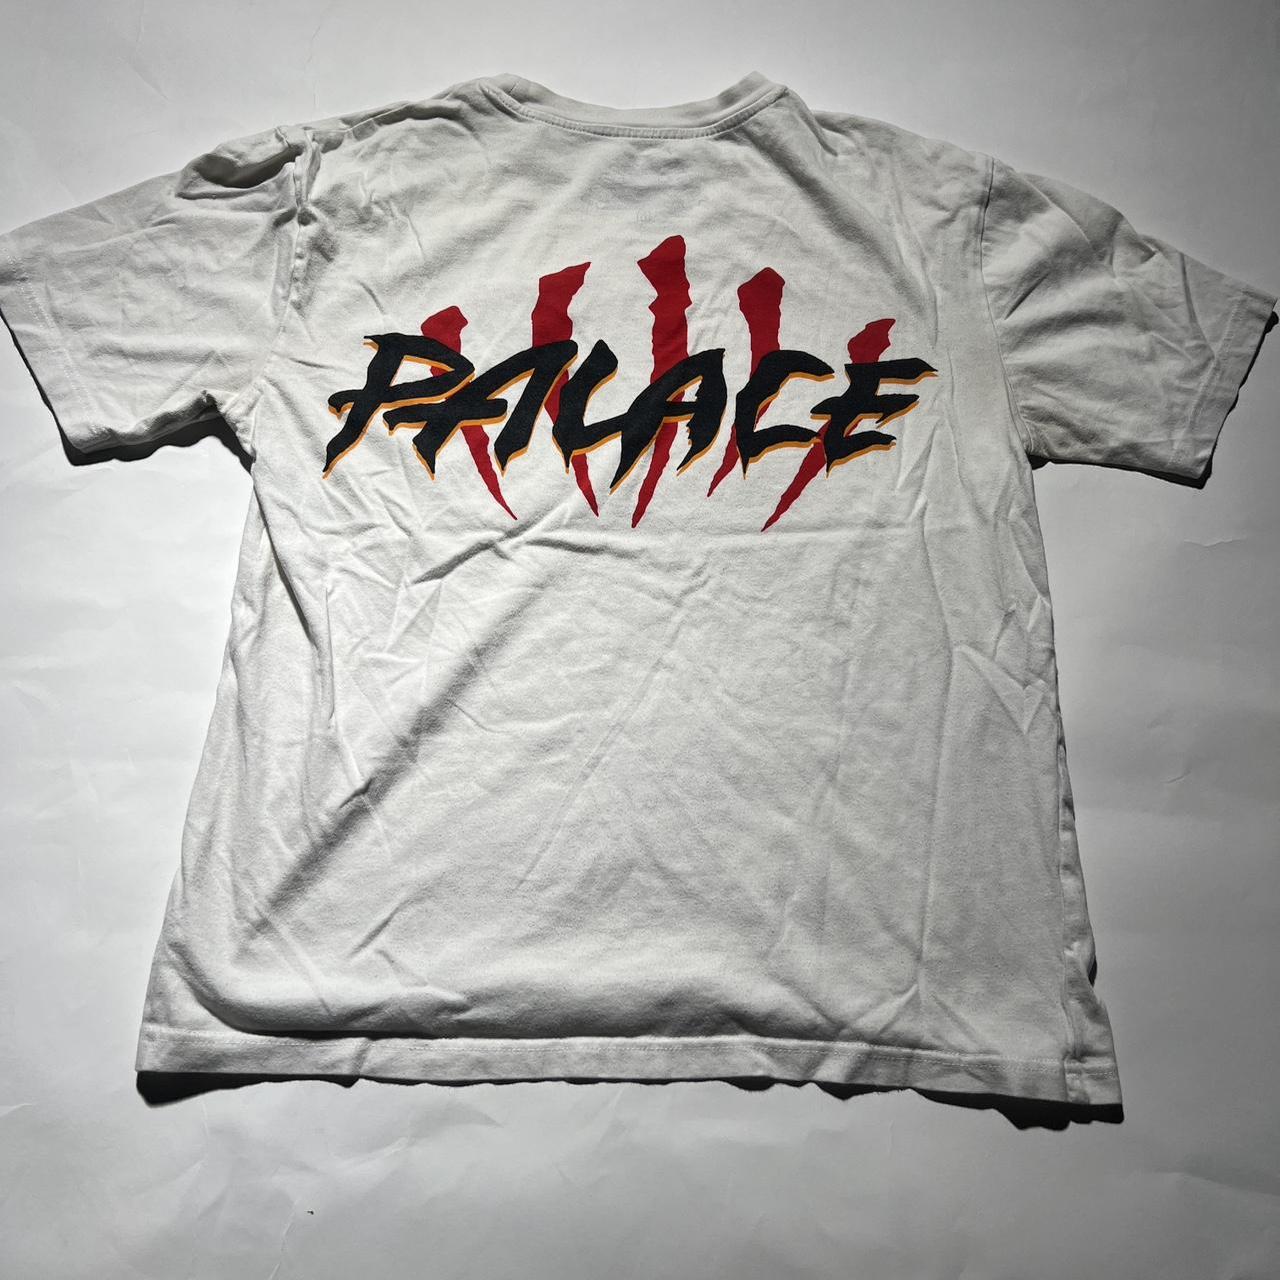 Palace Men's White and Red T-shirt - 1